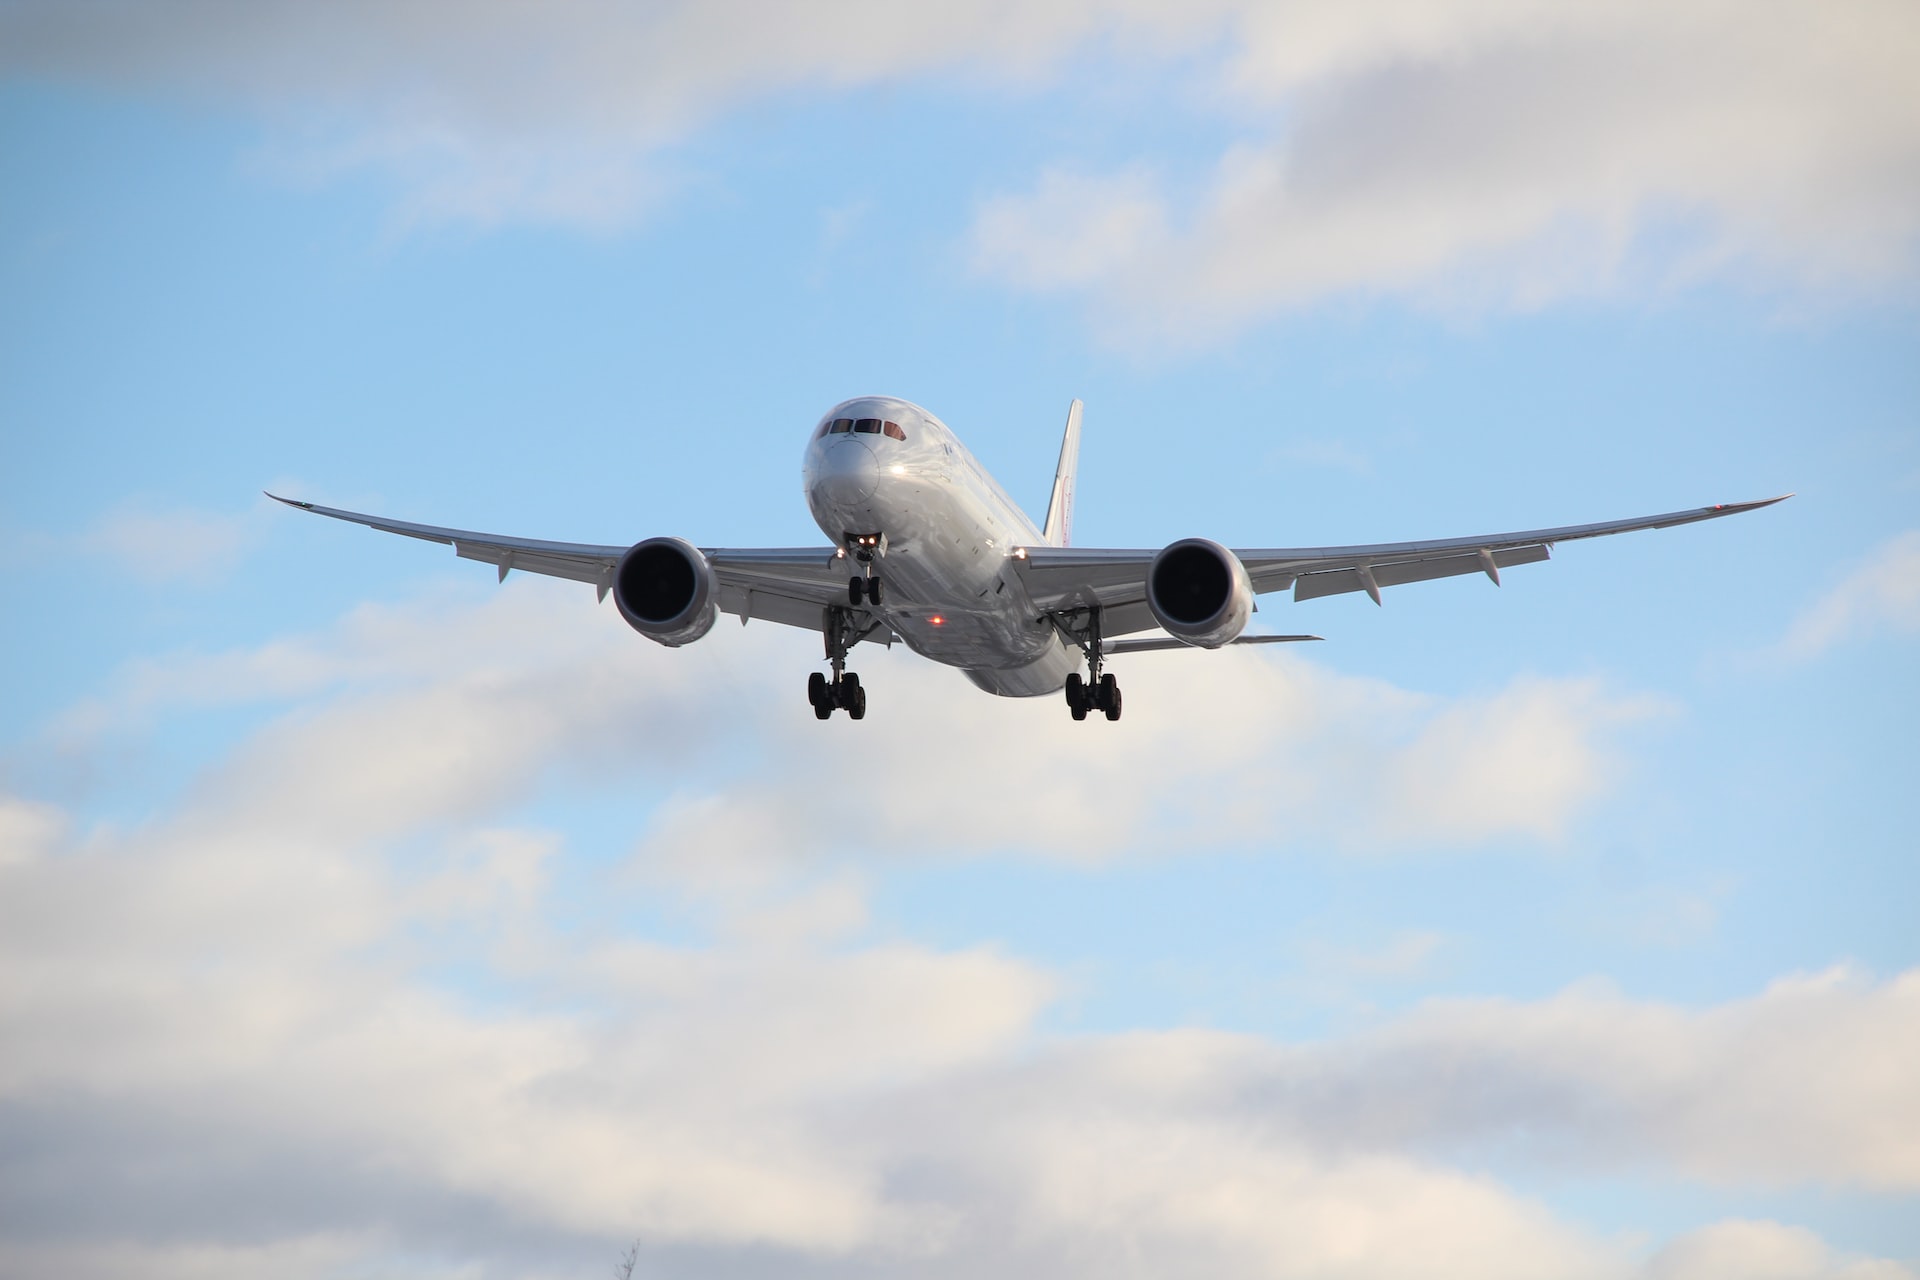 How is the Aviation Industry Trying To Promote Environmental Sustainability?